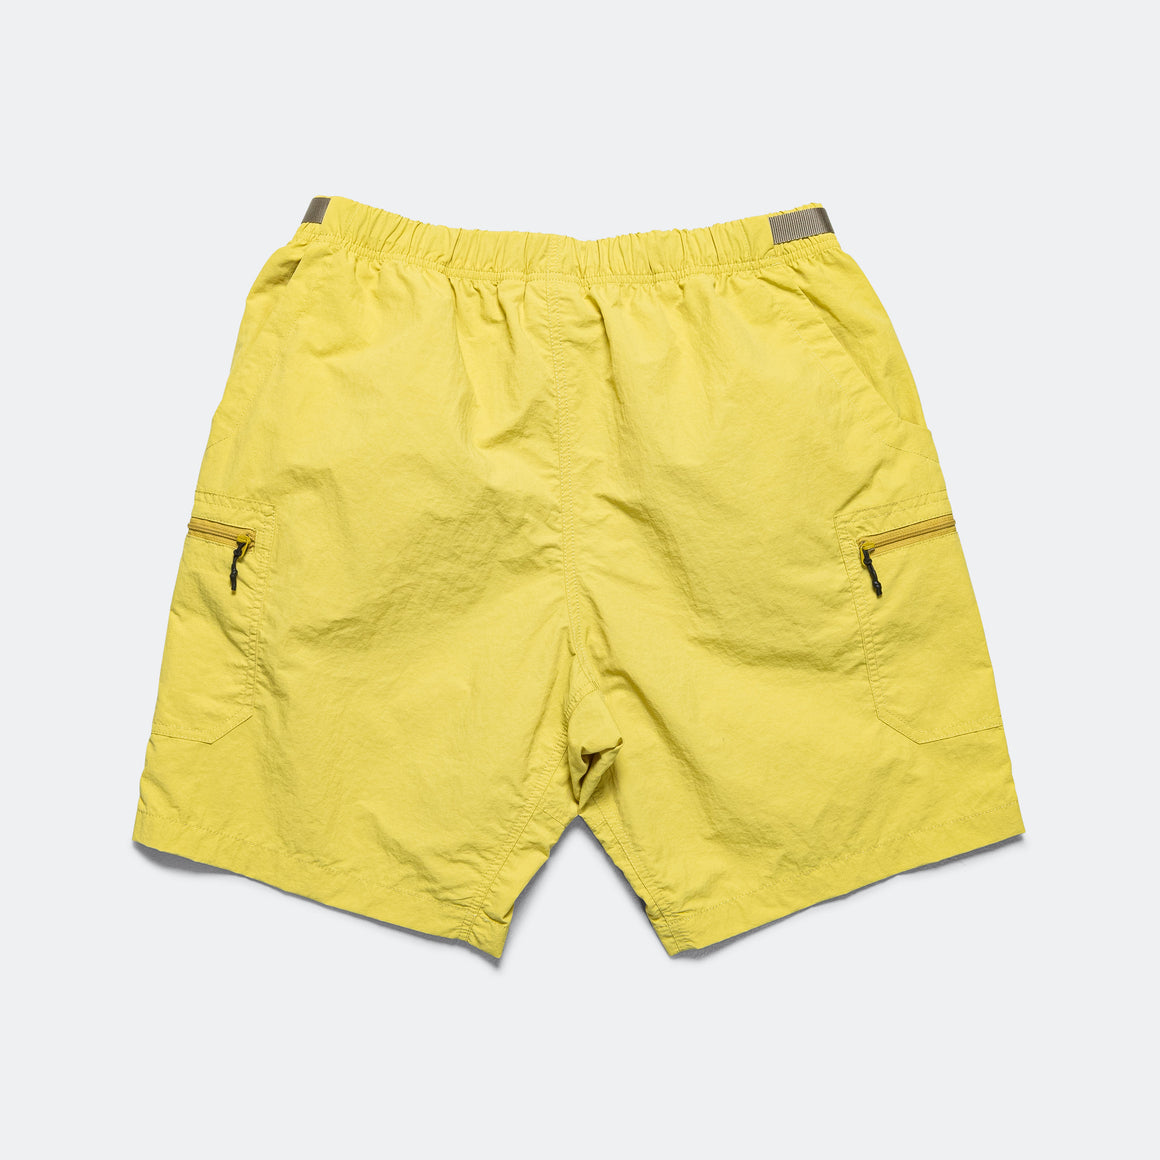 Gramicci - Nylon Utility Short - Canary Yellow - UP THERE